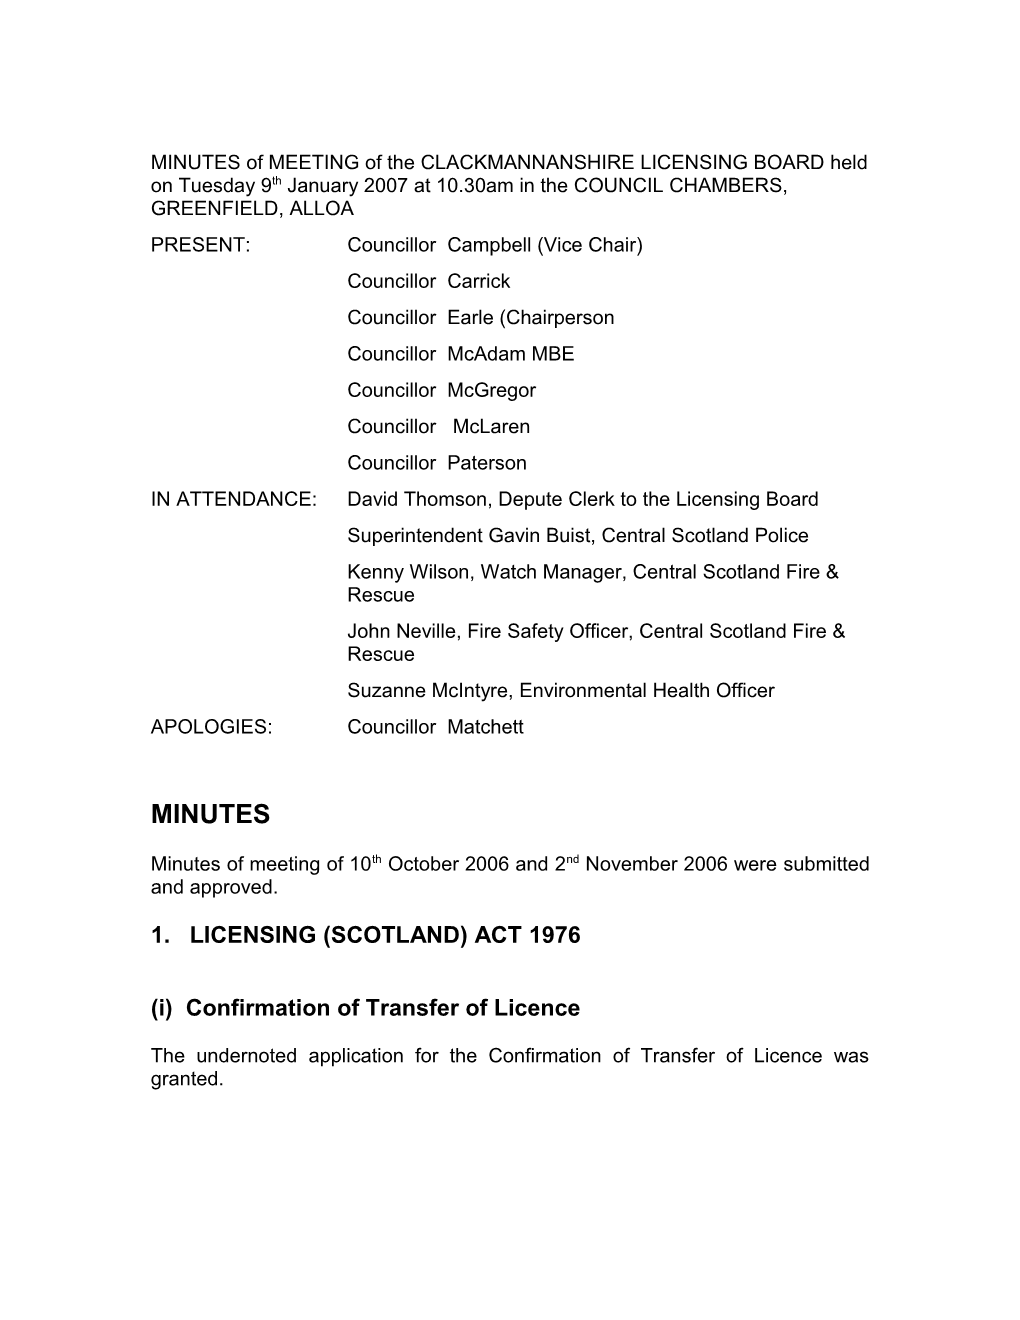 MINUTES of MEETING of the CLACKMANNANSHIRE LICENSING BOARD Held in the COUNCIL CHAMBERS